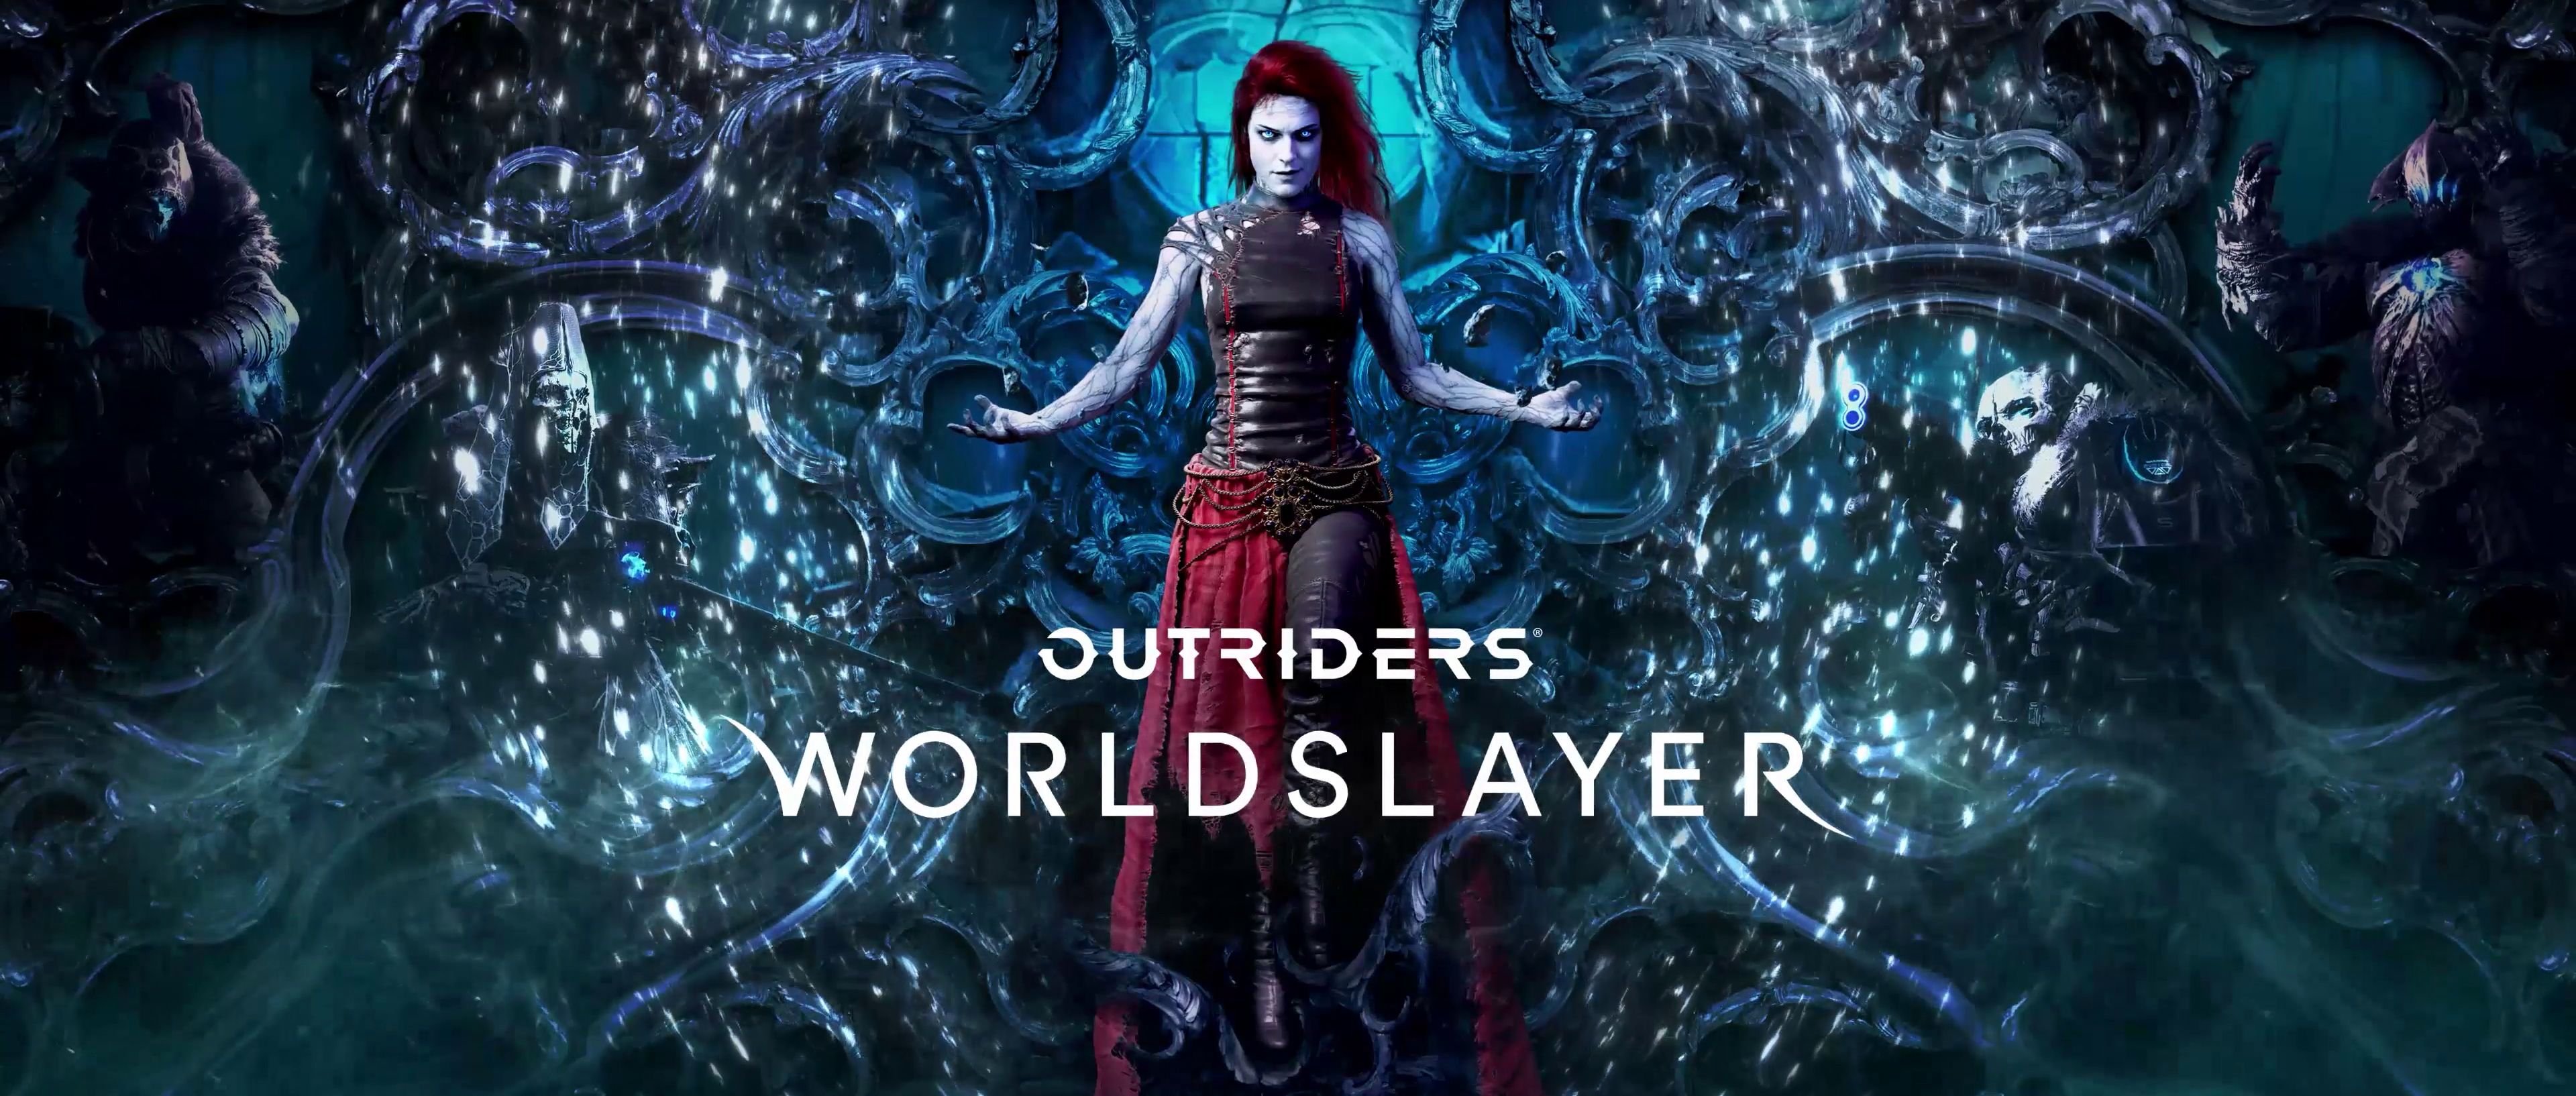 outriders-worldslayer-1